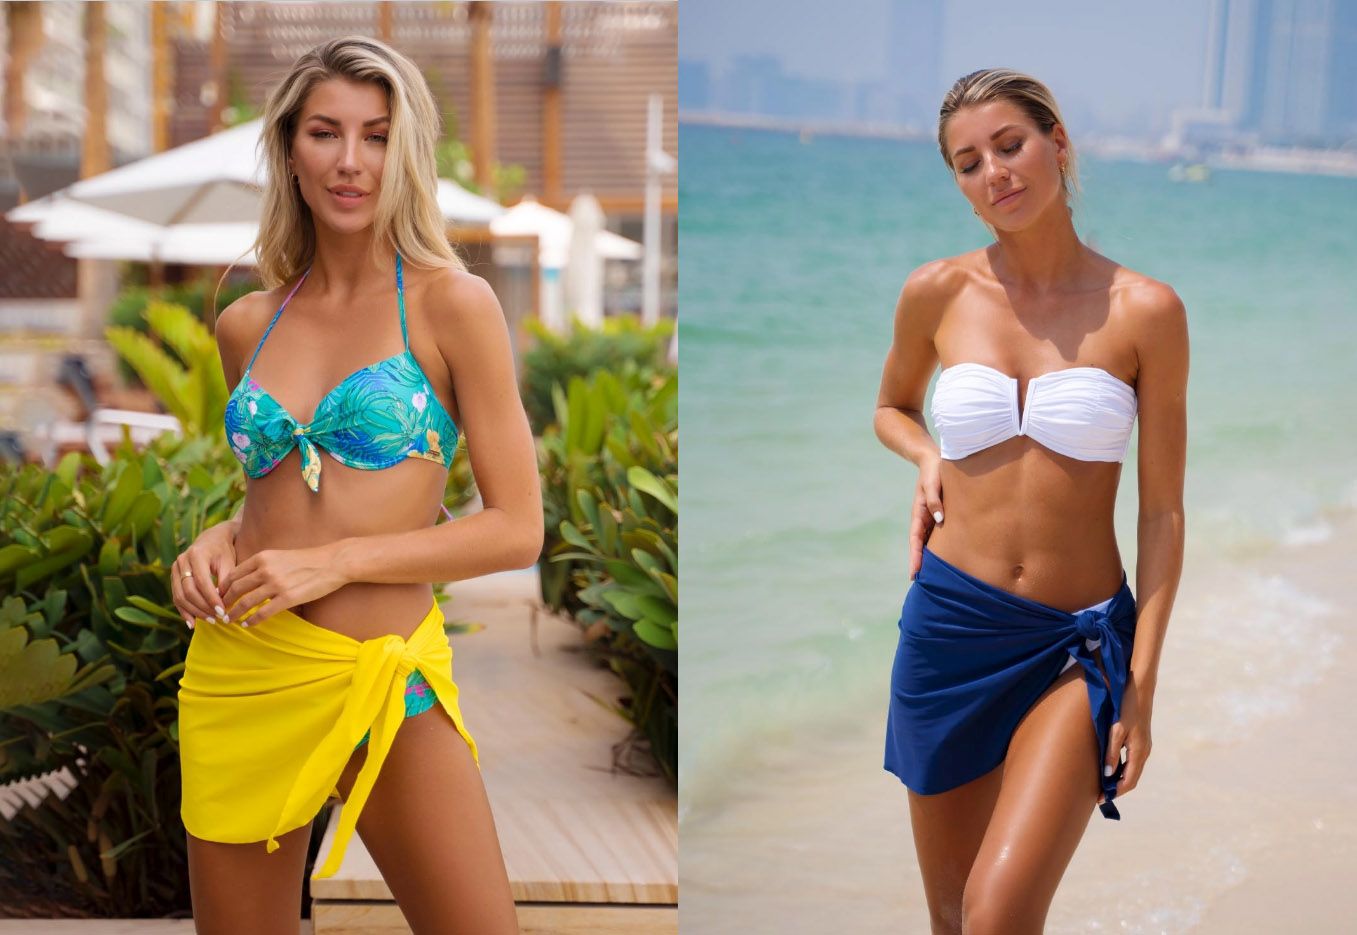 Outfits that would look great at brunch and the beach | Caha Capo - Luxury Swimwear